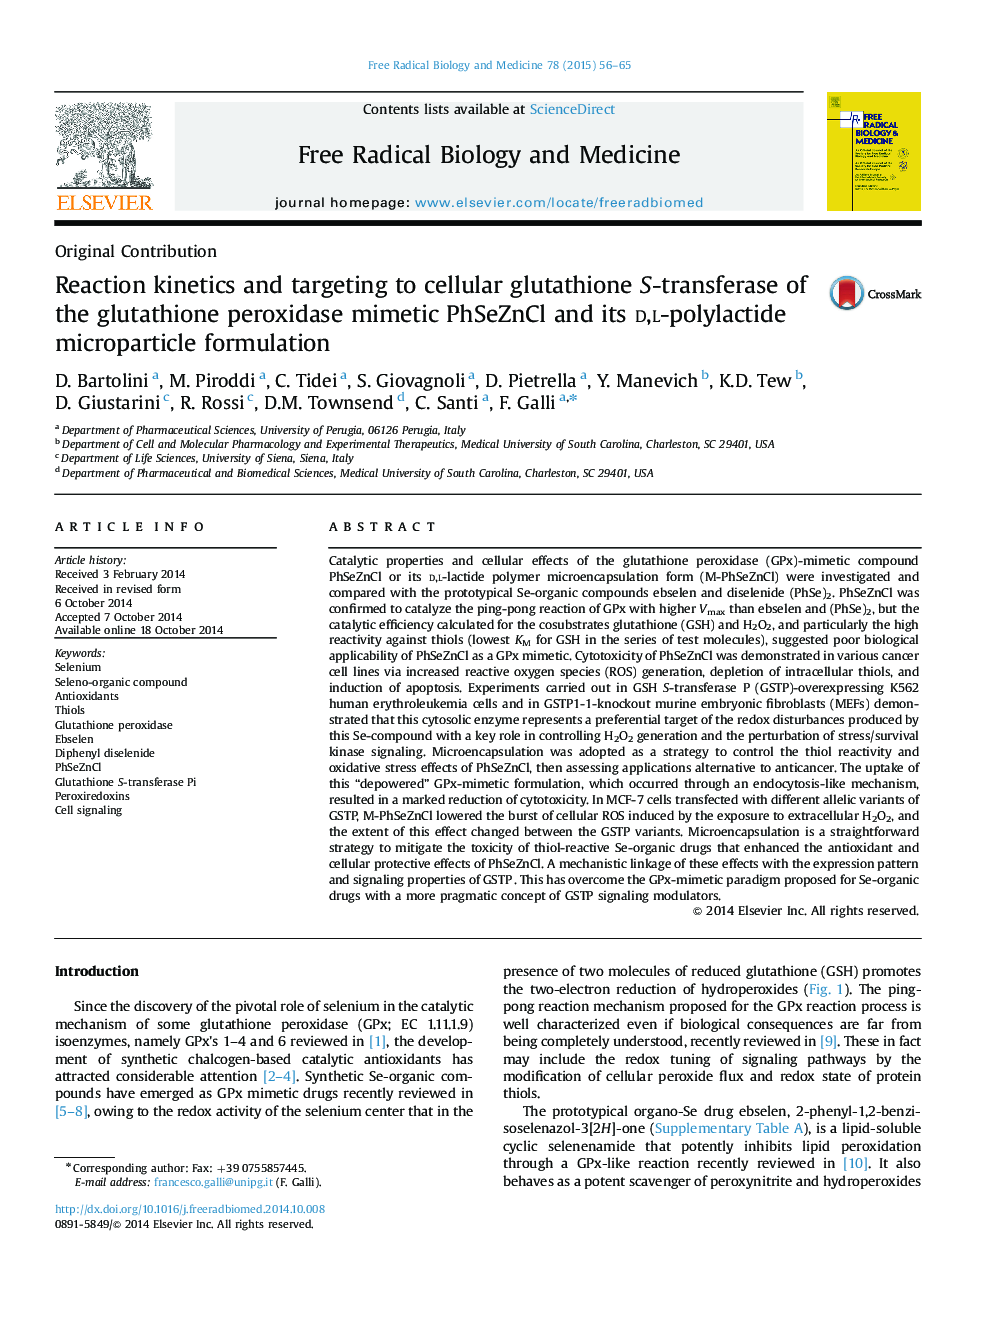 Reaction kinetics and targeting to cellular glutathione S-transferase of the glutathione peroxidase mimetic PhSeZnCl and its d,l-polylactide microparticle formulation